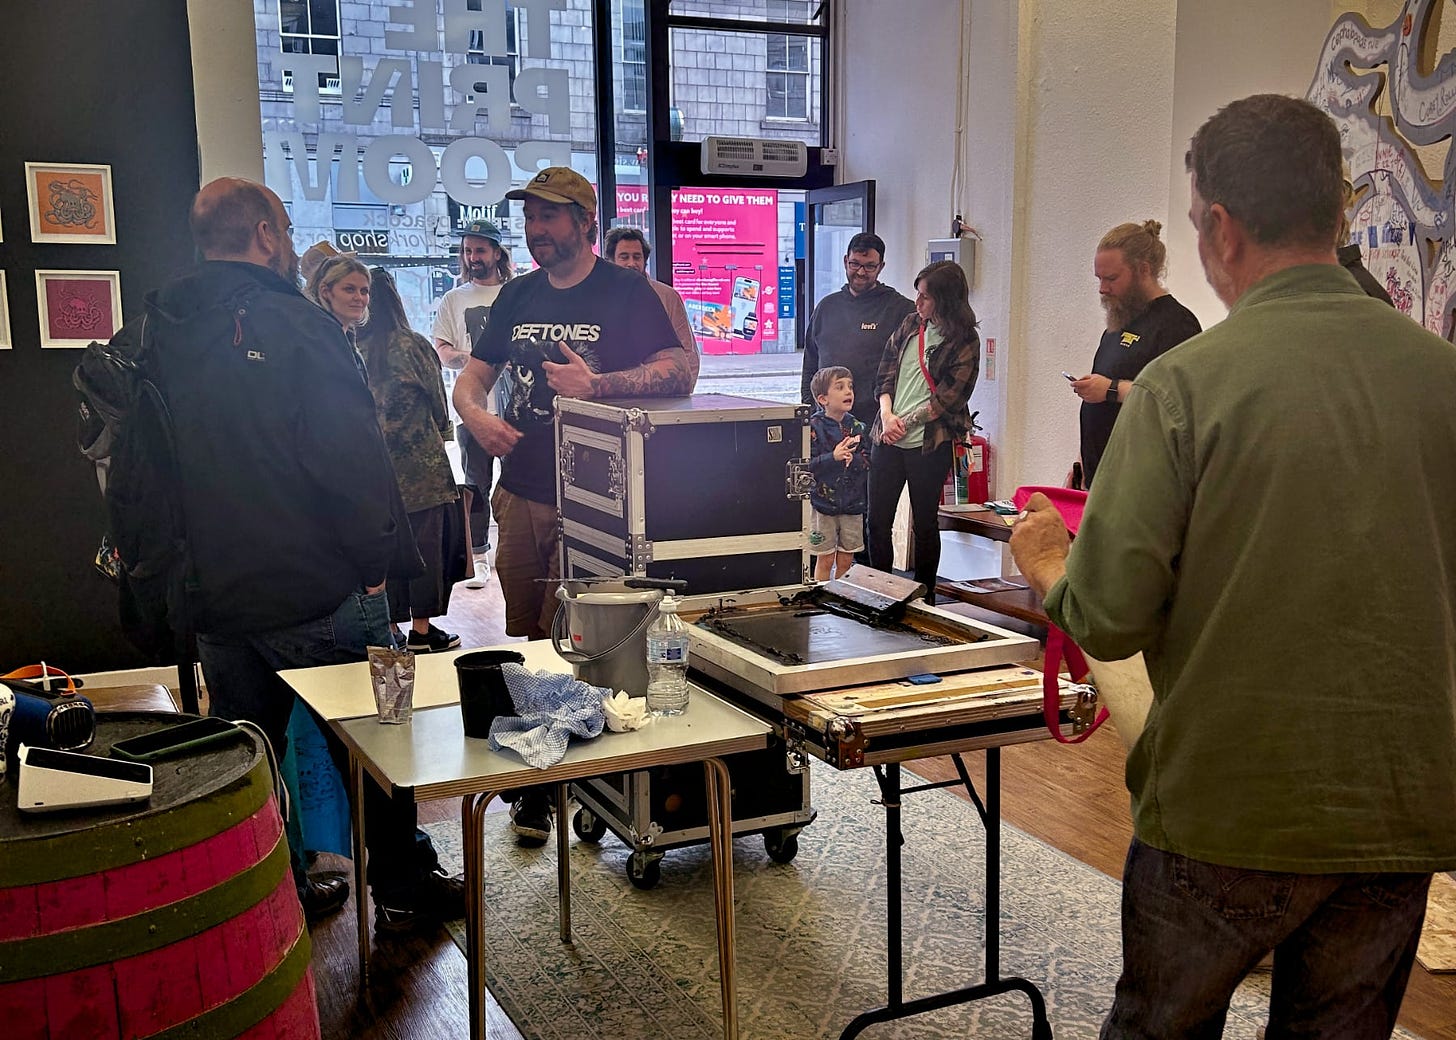 A photo from the opening of Craig Fisher’s 'Popcorn Octopus' show at The Print Room. The room is bustling with visitors of various ages engaged in conversation. In the center, a man wearing a band t-shirt is interacting with attendees near a printmaking station with equipment and ink, suggesting a live demonstration. Artwork adorns the walls, and the venue has an inviting atmosphere with natural light coming in from the large windows.